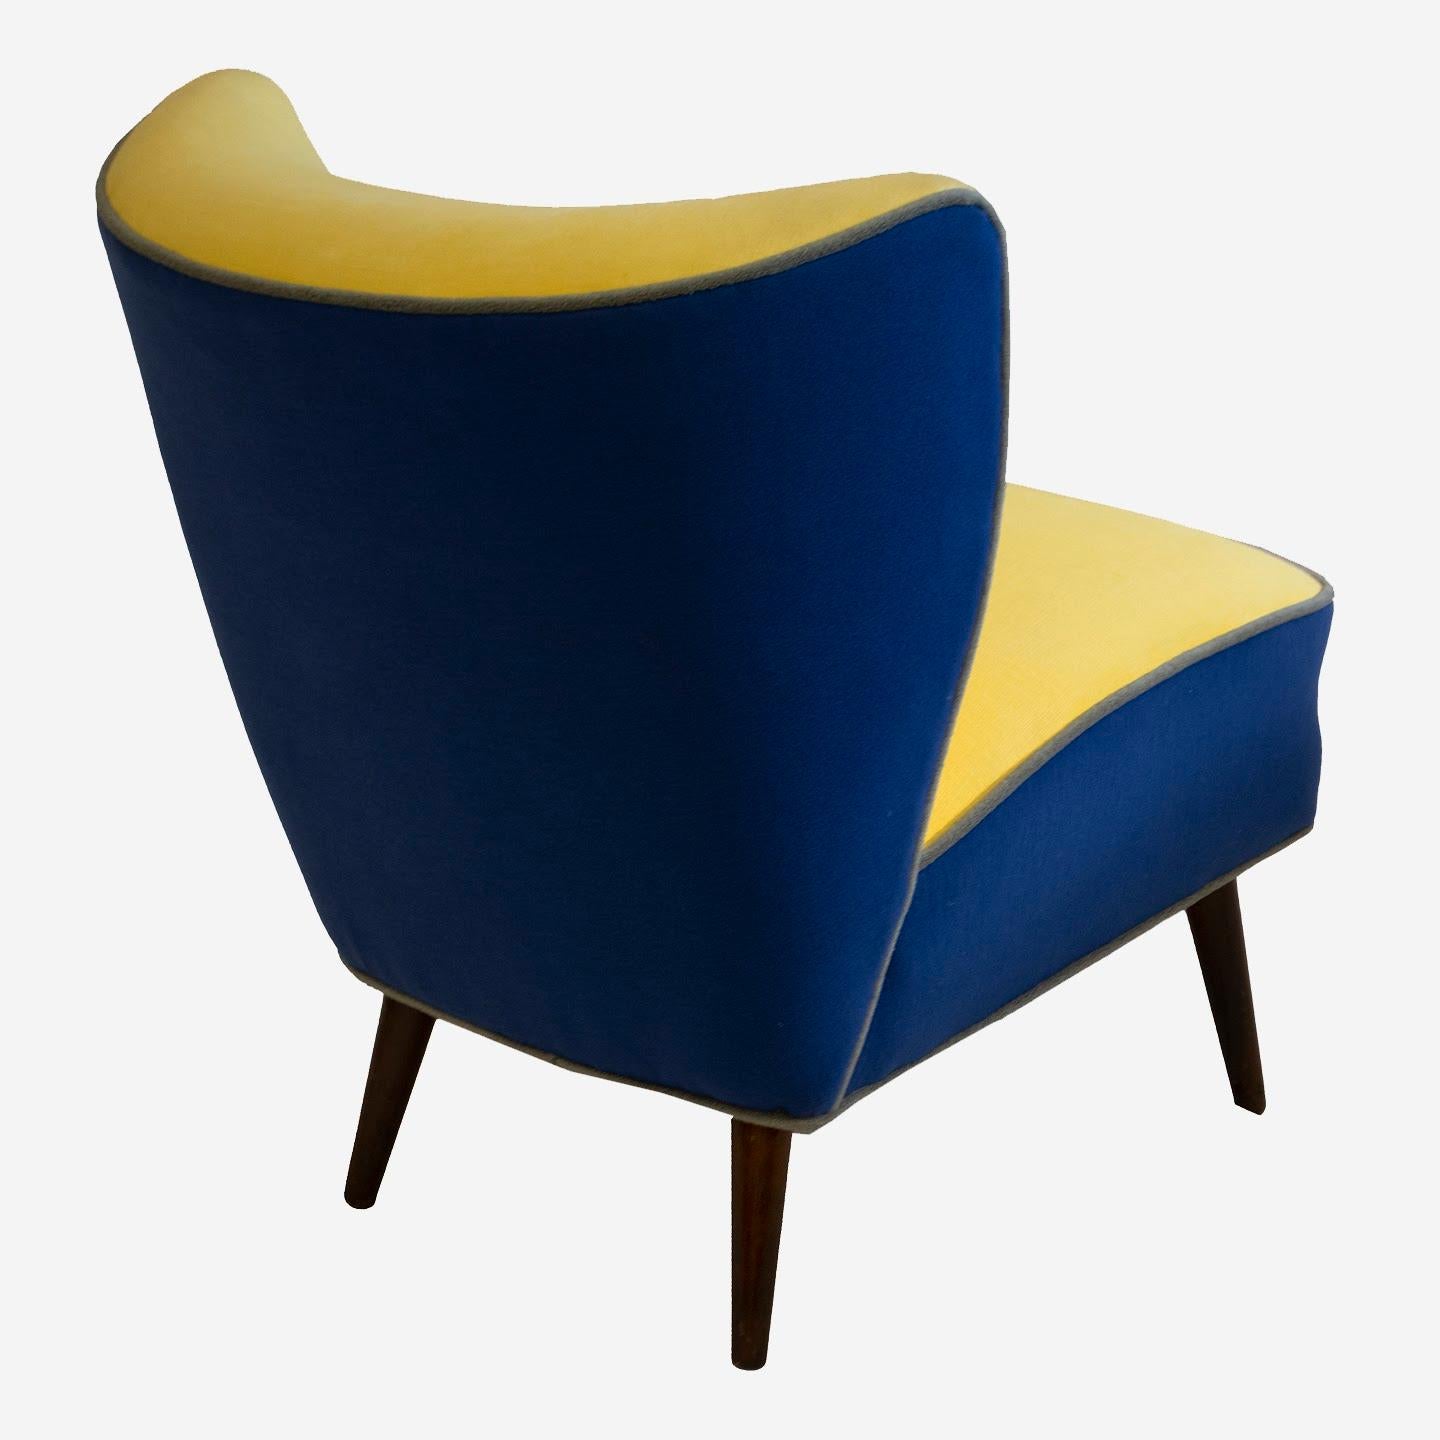 Hand-Crafted Petite Slipper Chair in the Style of James Mont For Sale